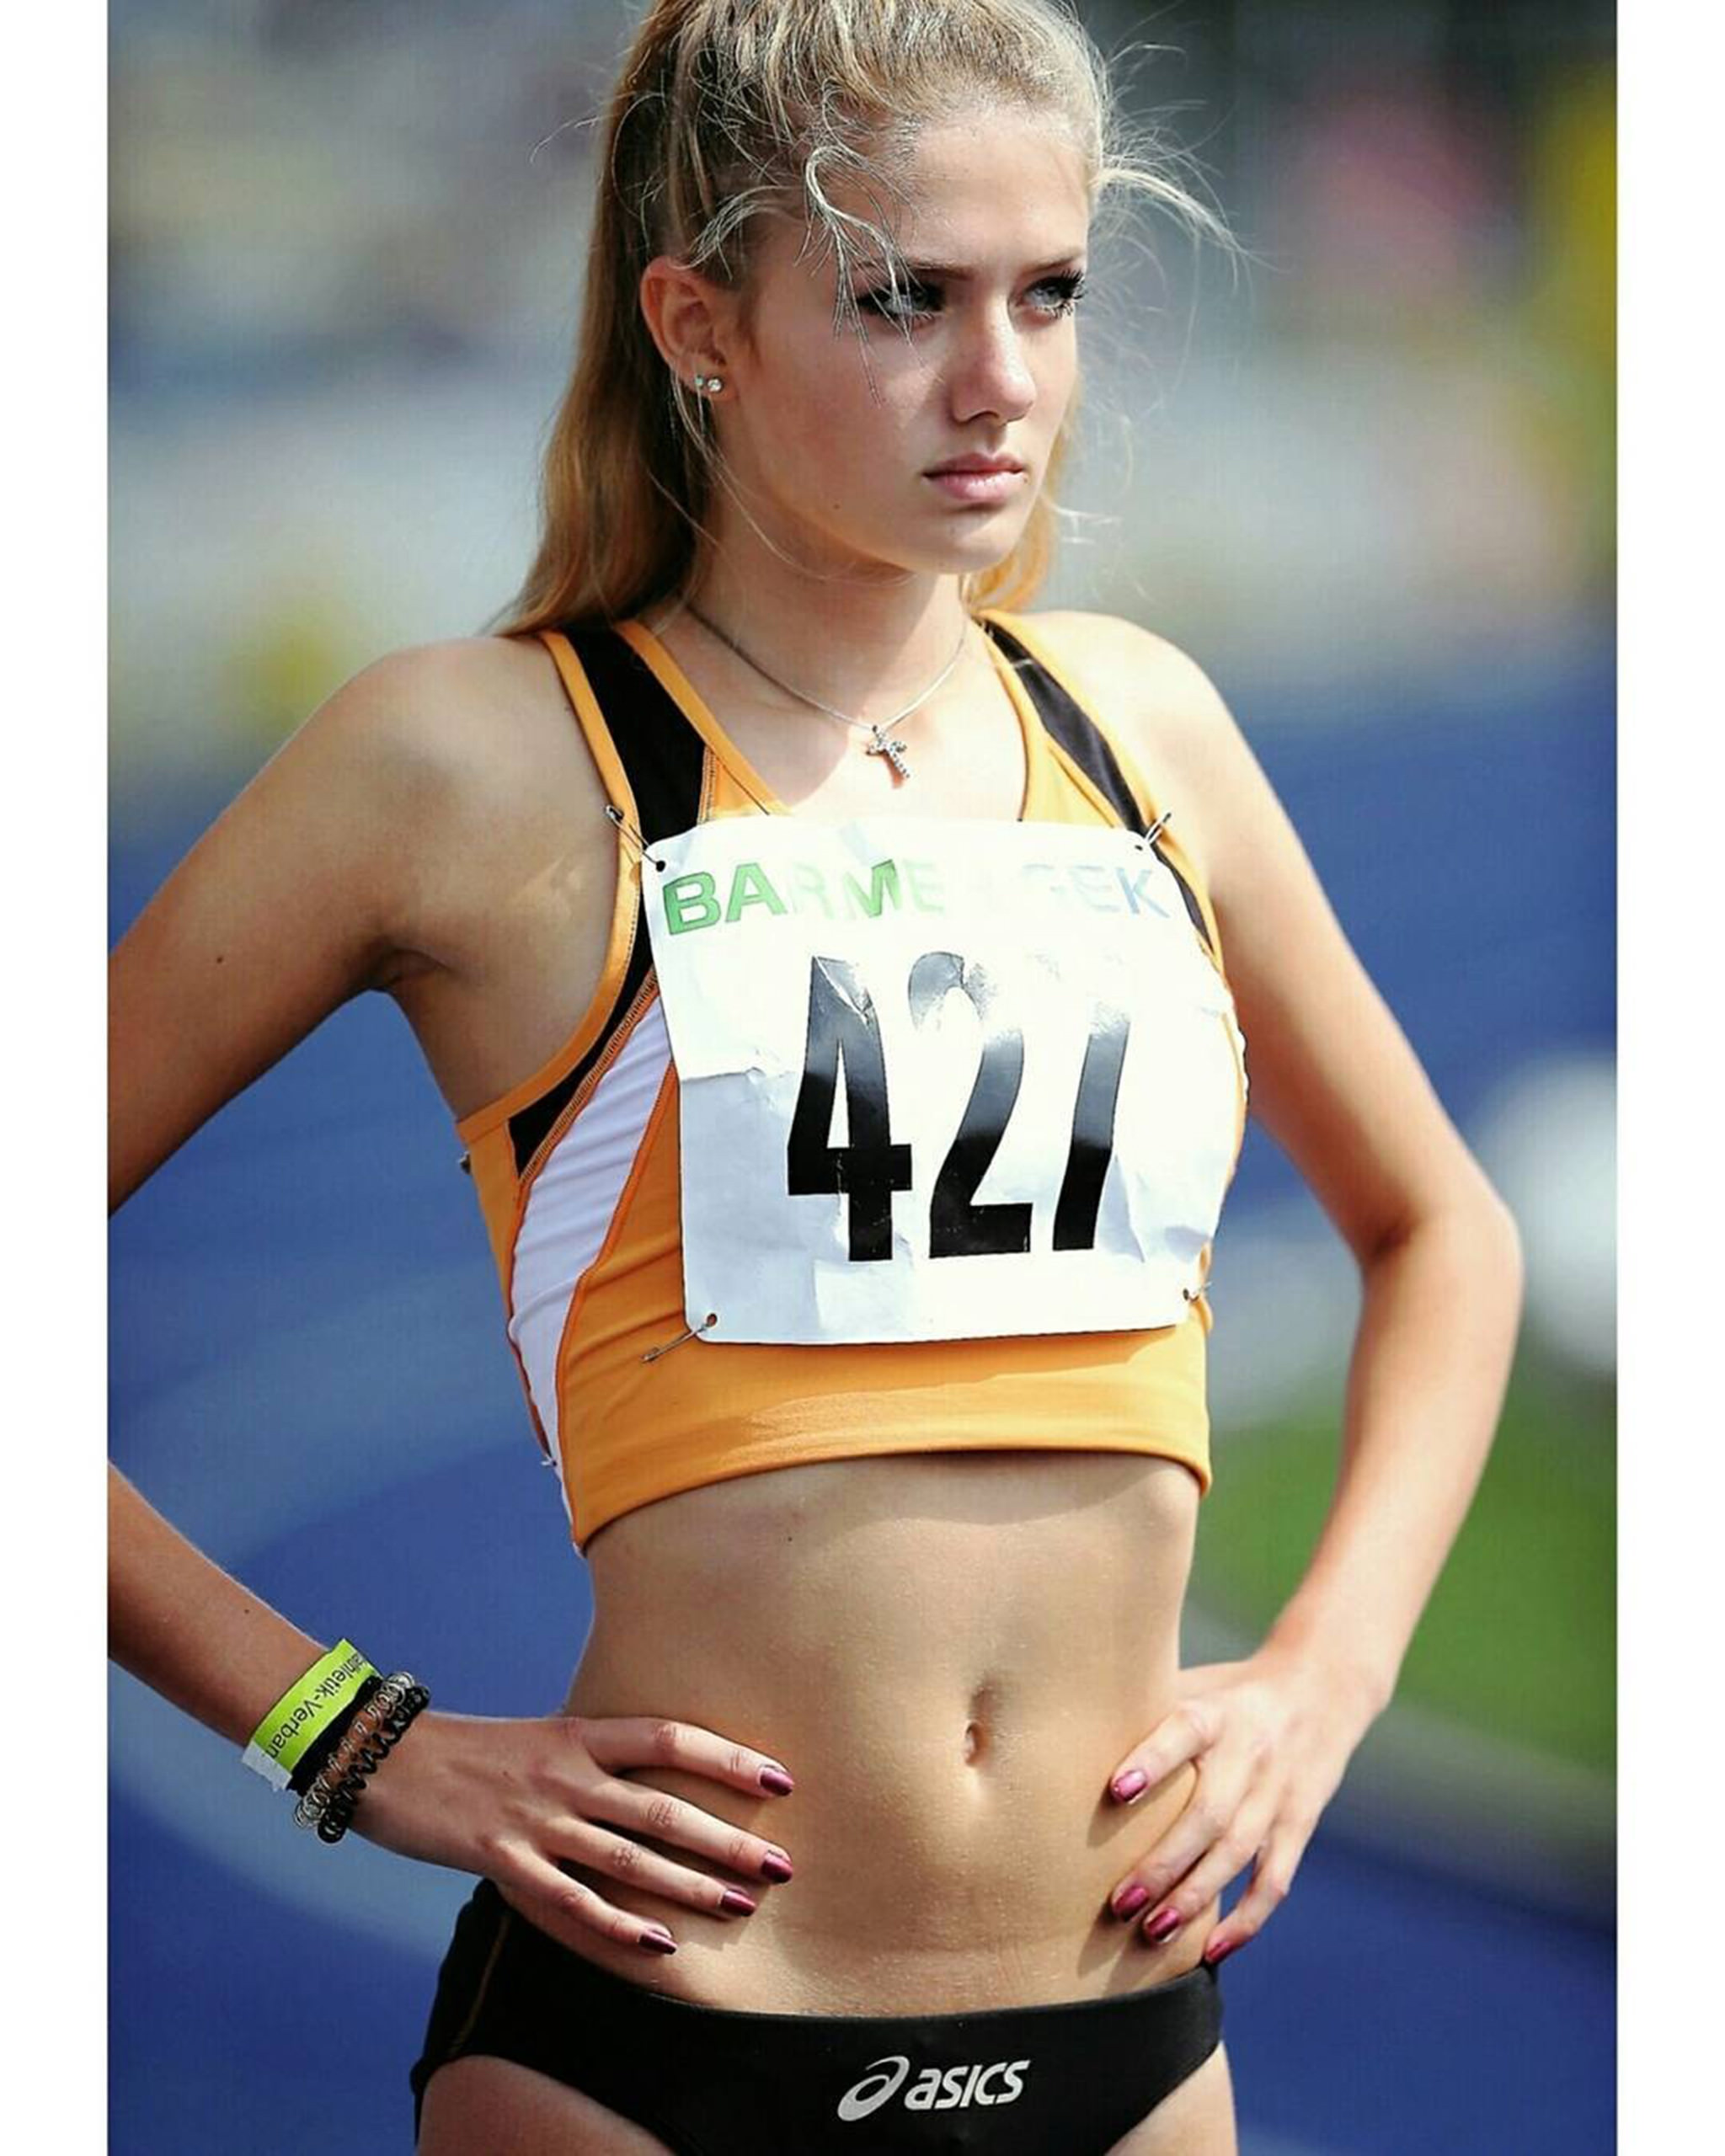 Worlds Sexiest Athlete 19 Yrs Alica Schmidt From Germany NSFW